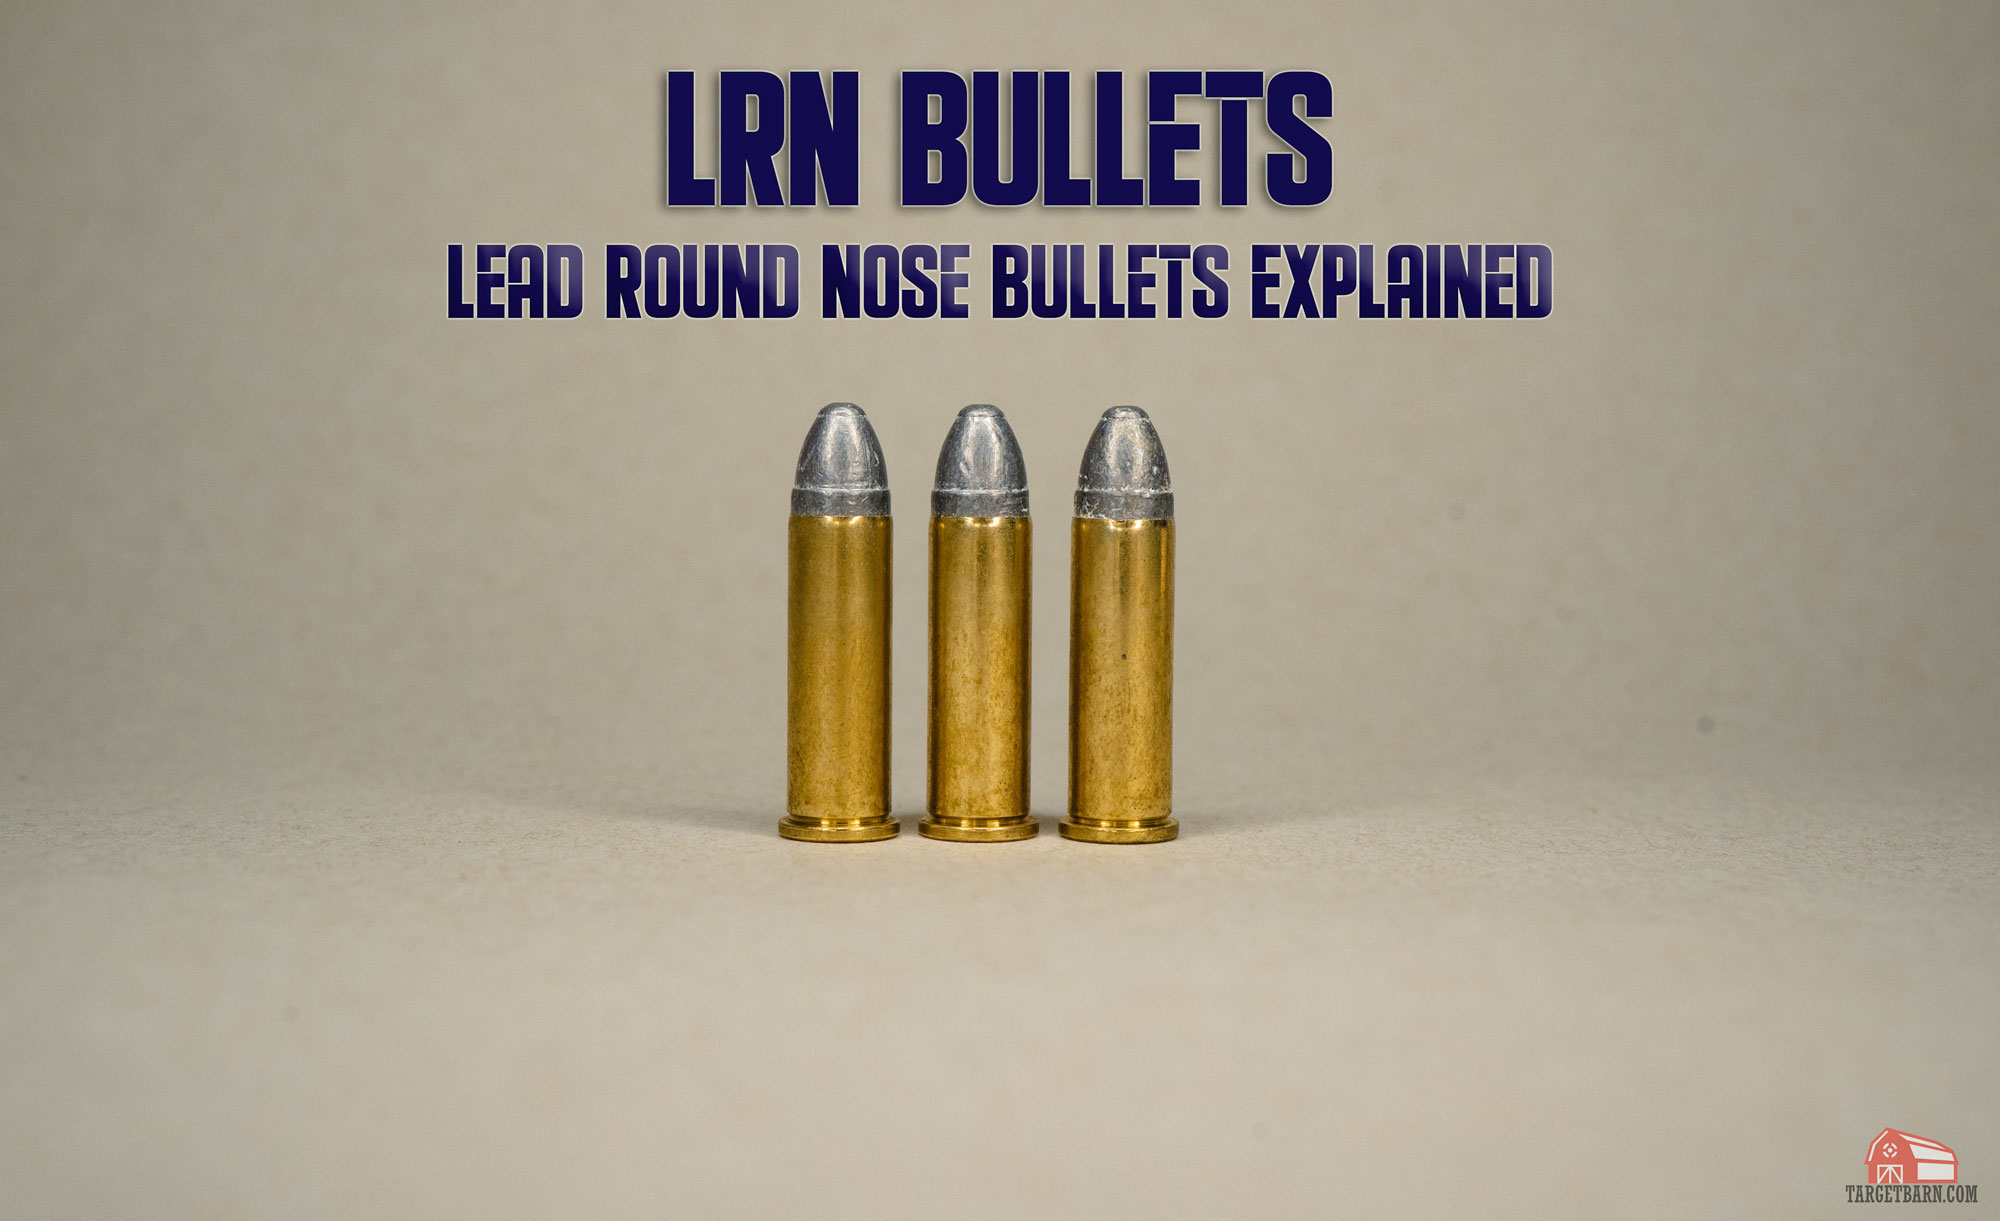 lrn bullets lead round nose bullets explained